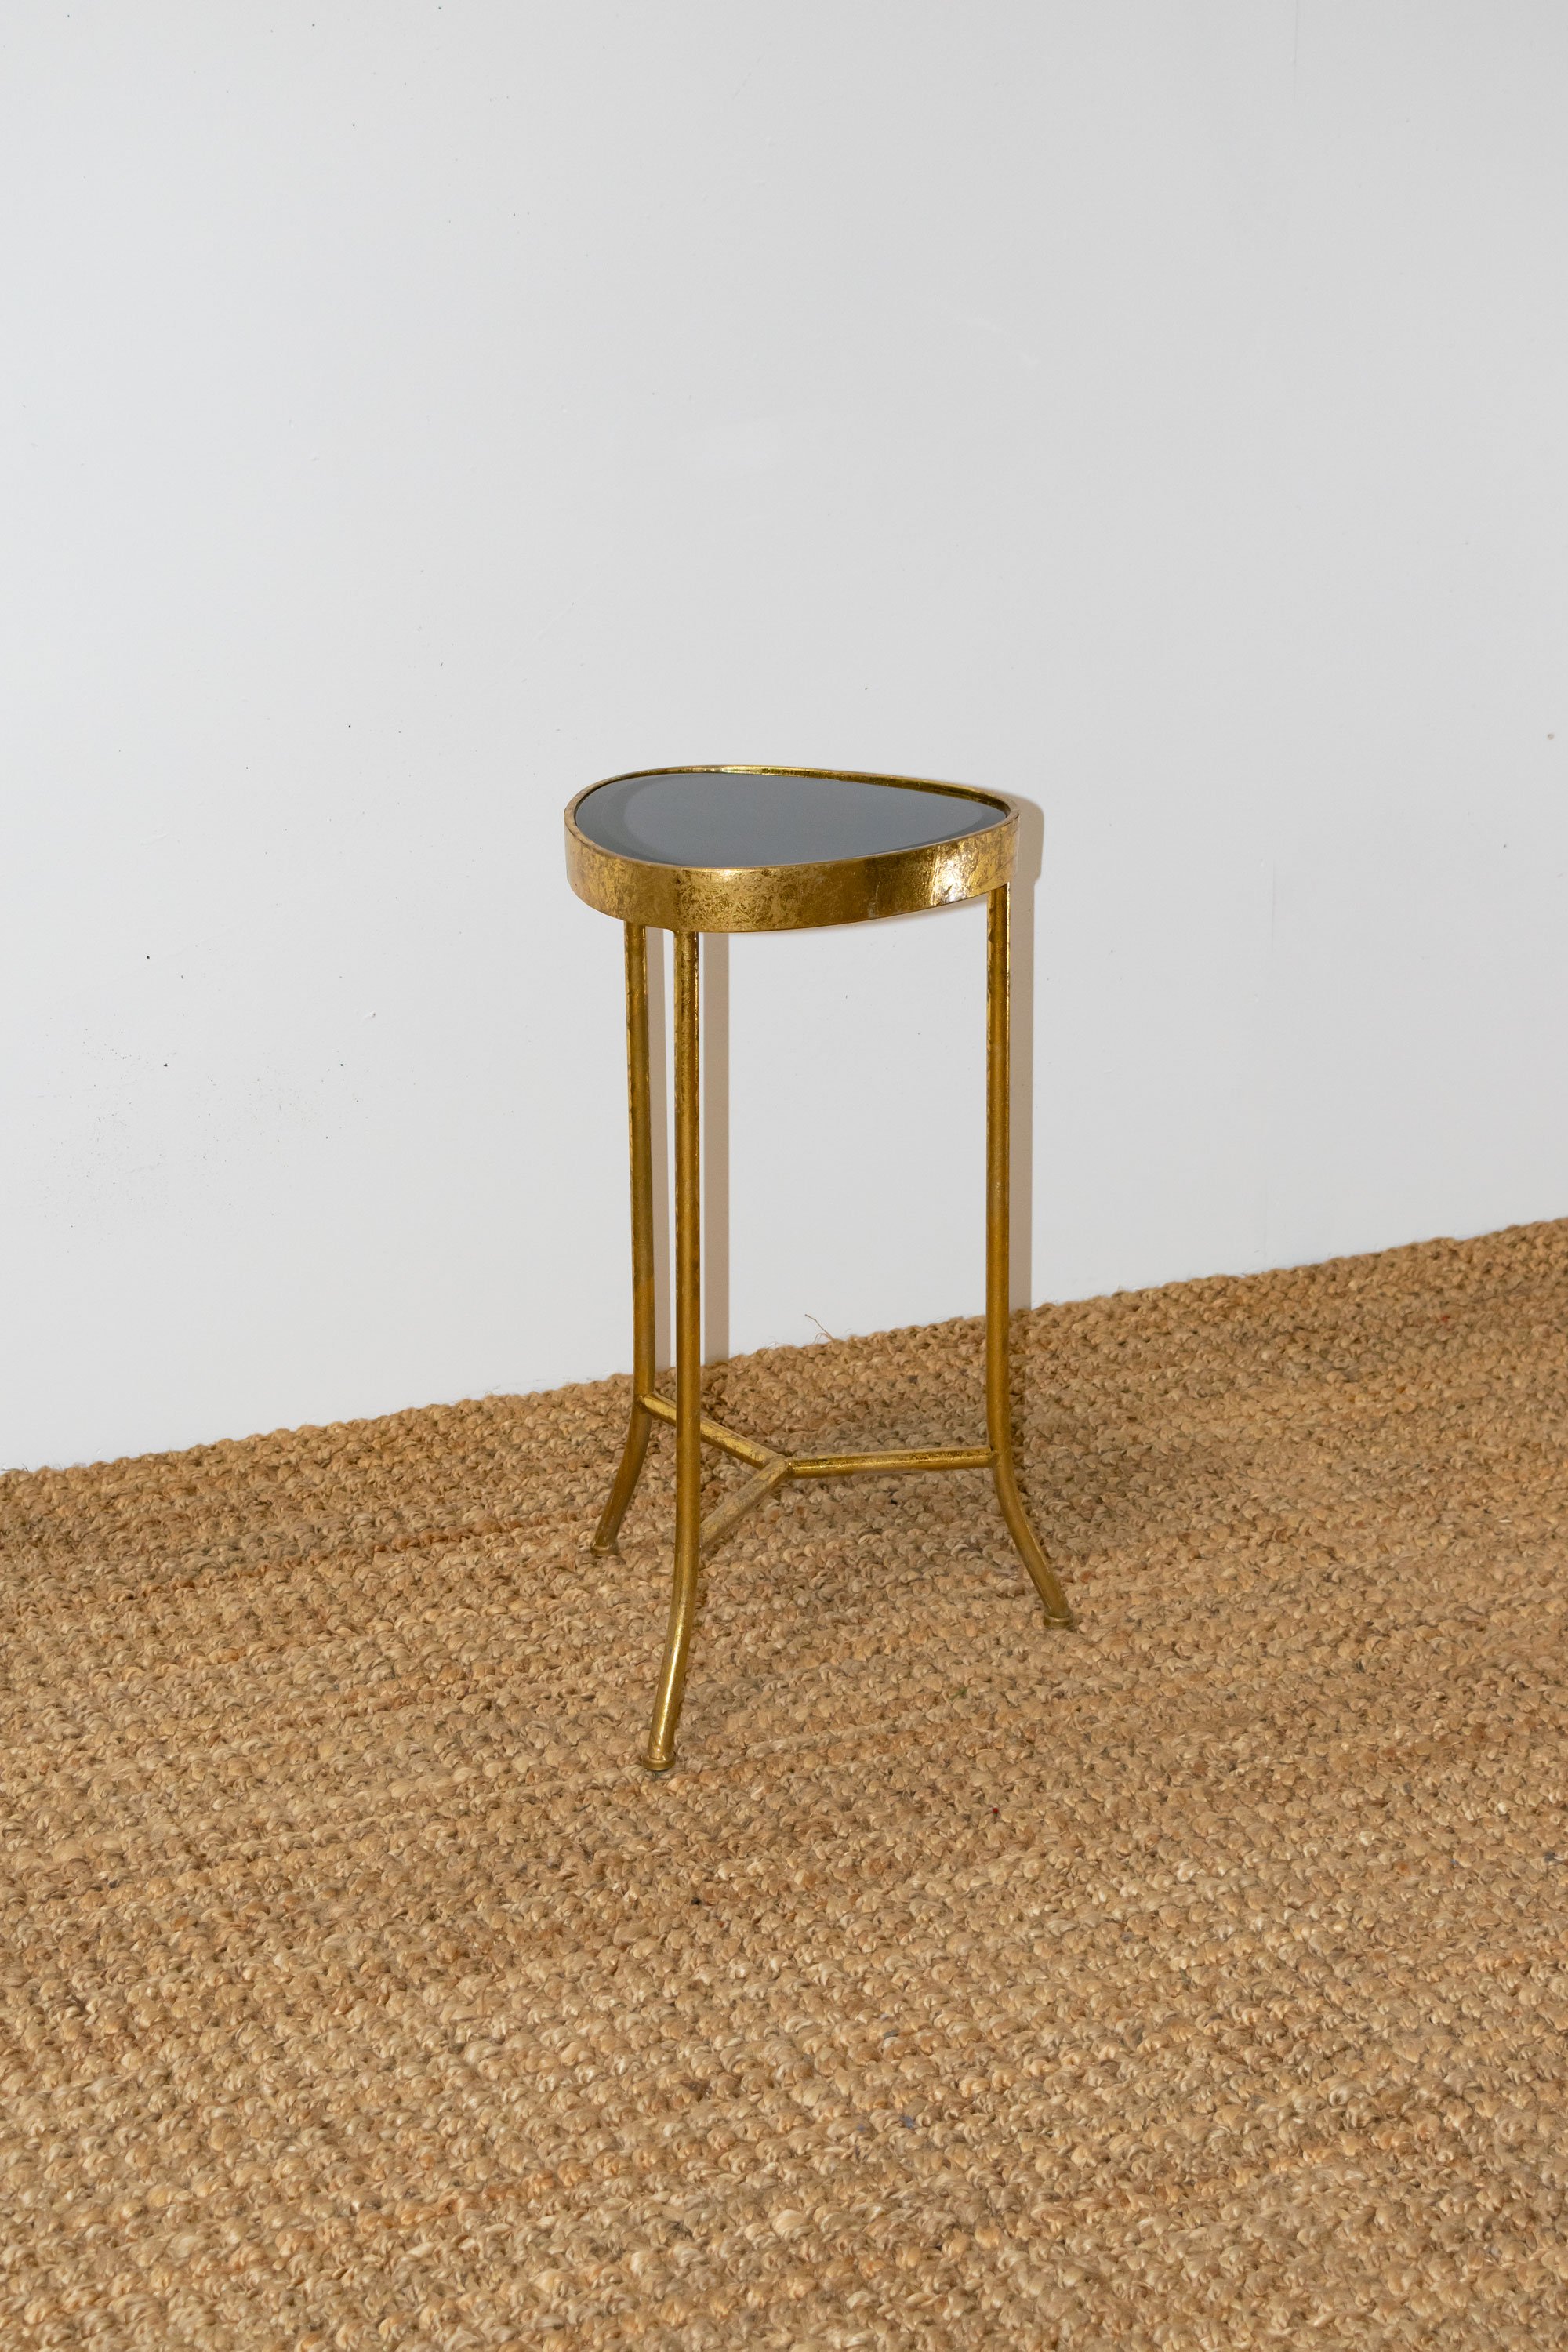 The Jewel End Table